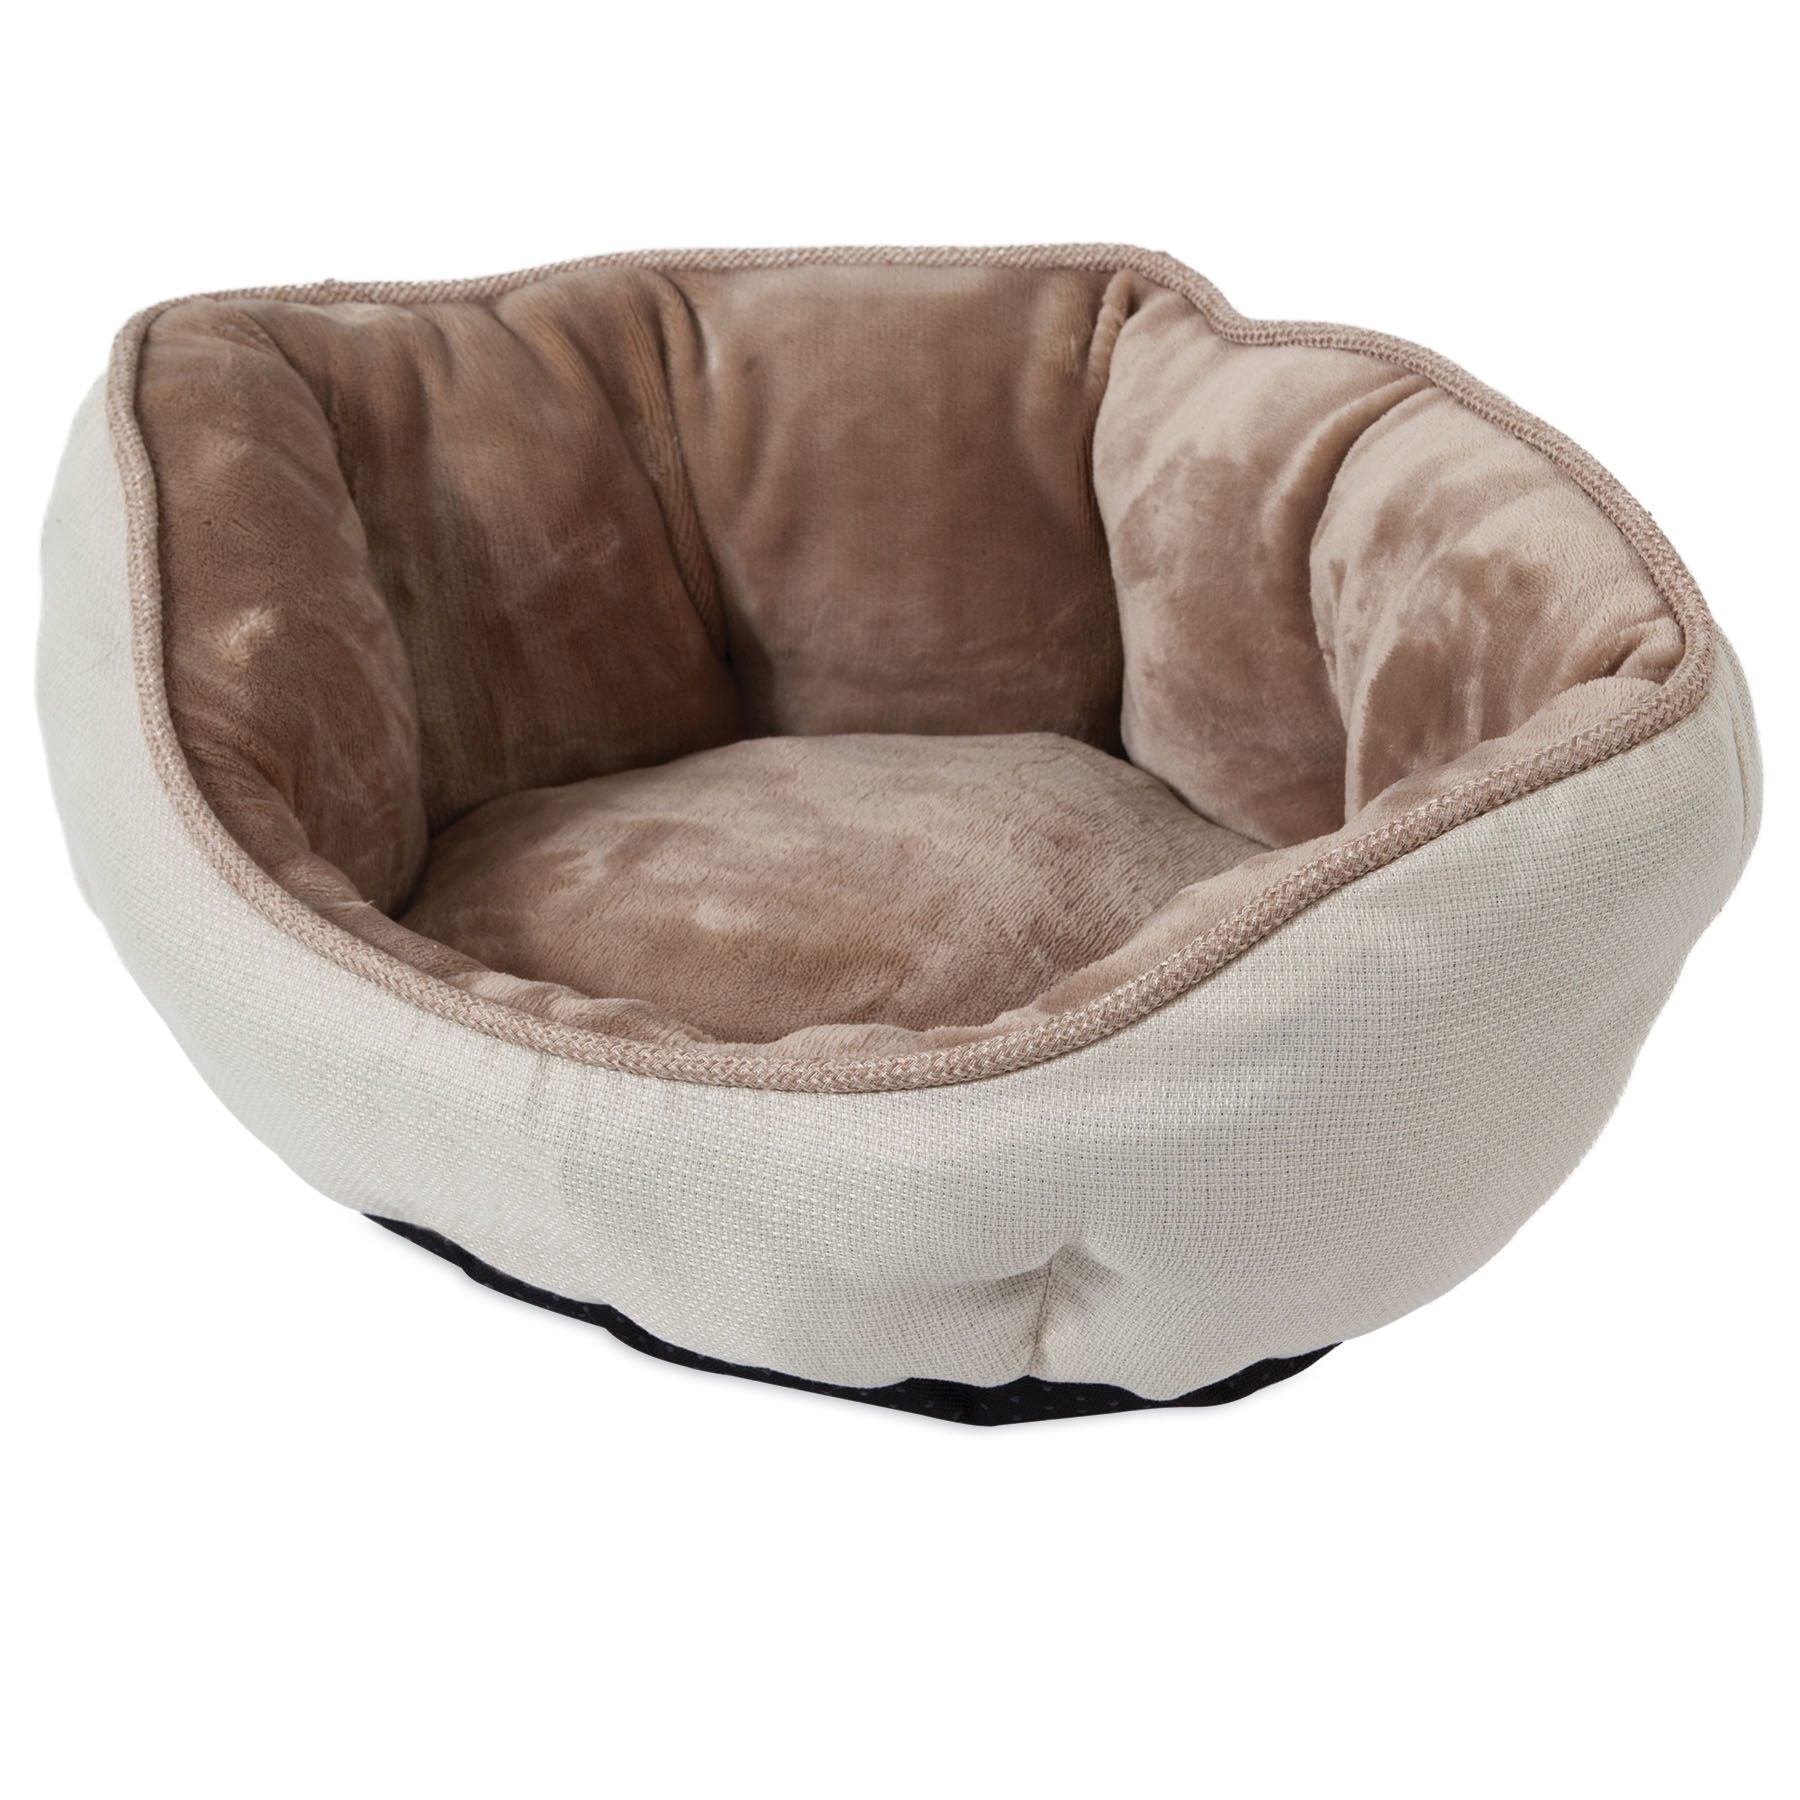 SnooZZy Rustic Elegance Clamshell Pet Bed